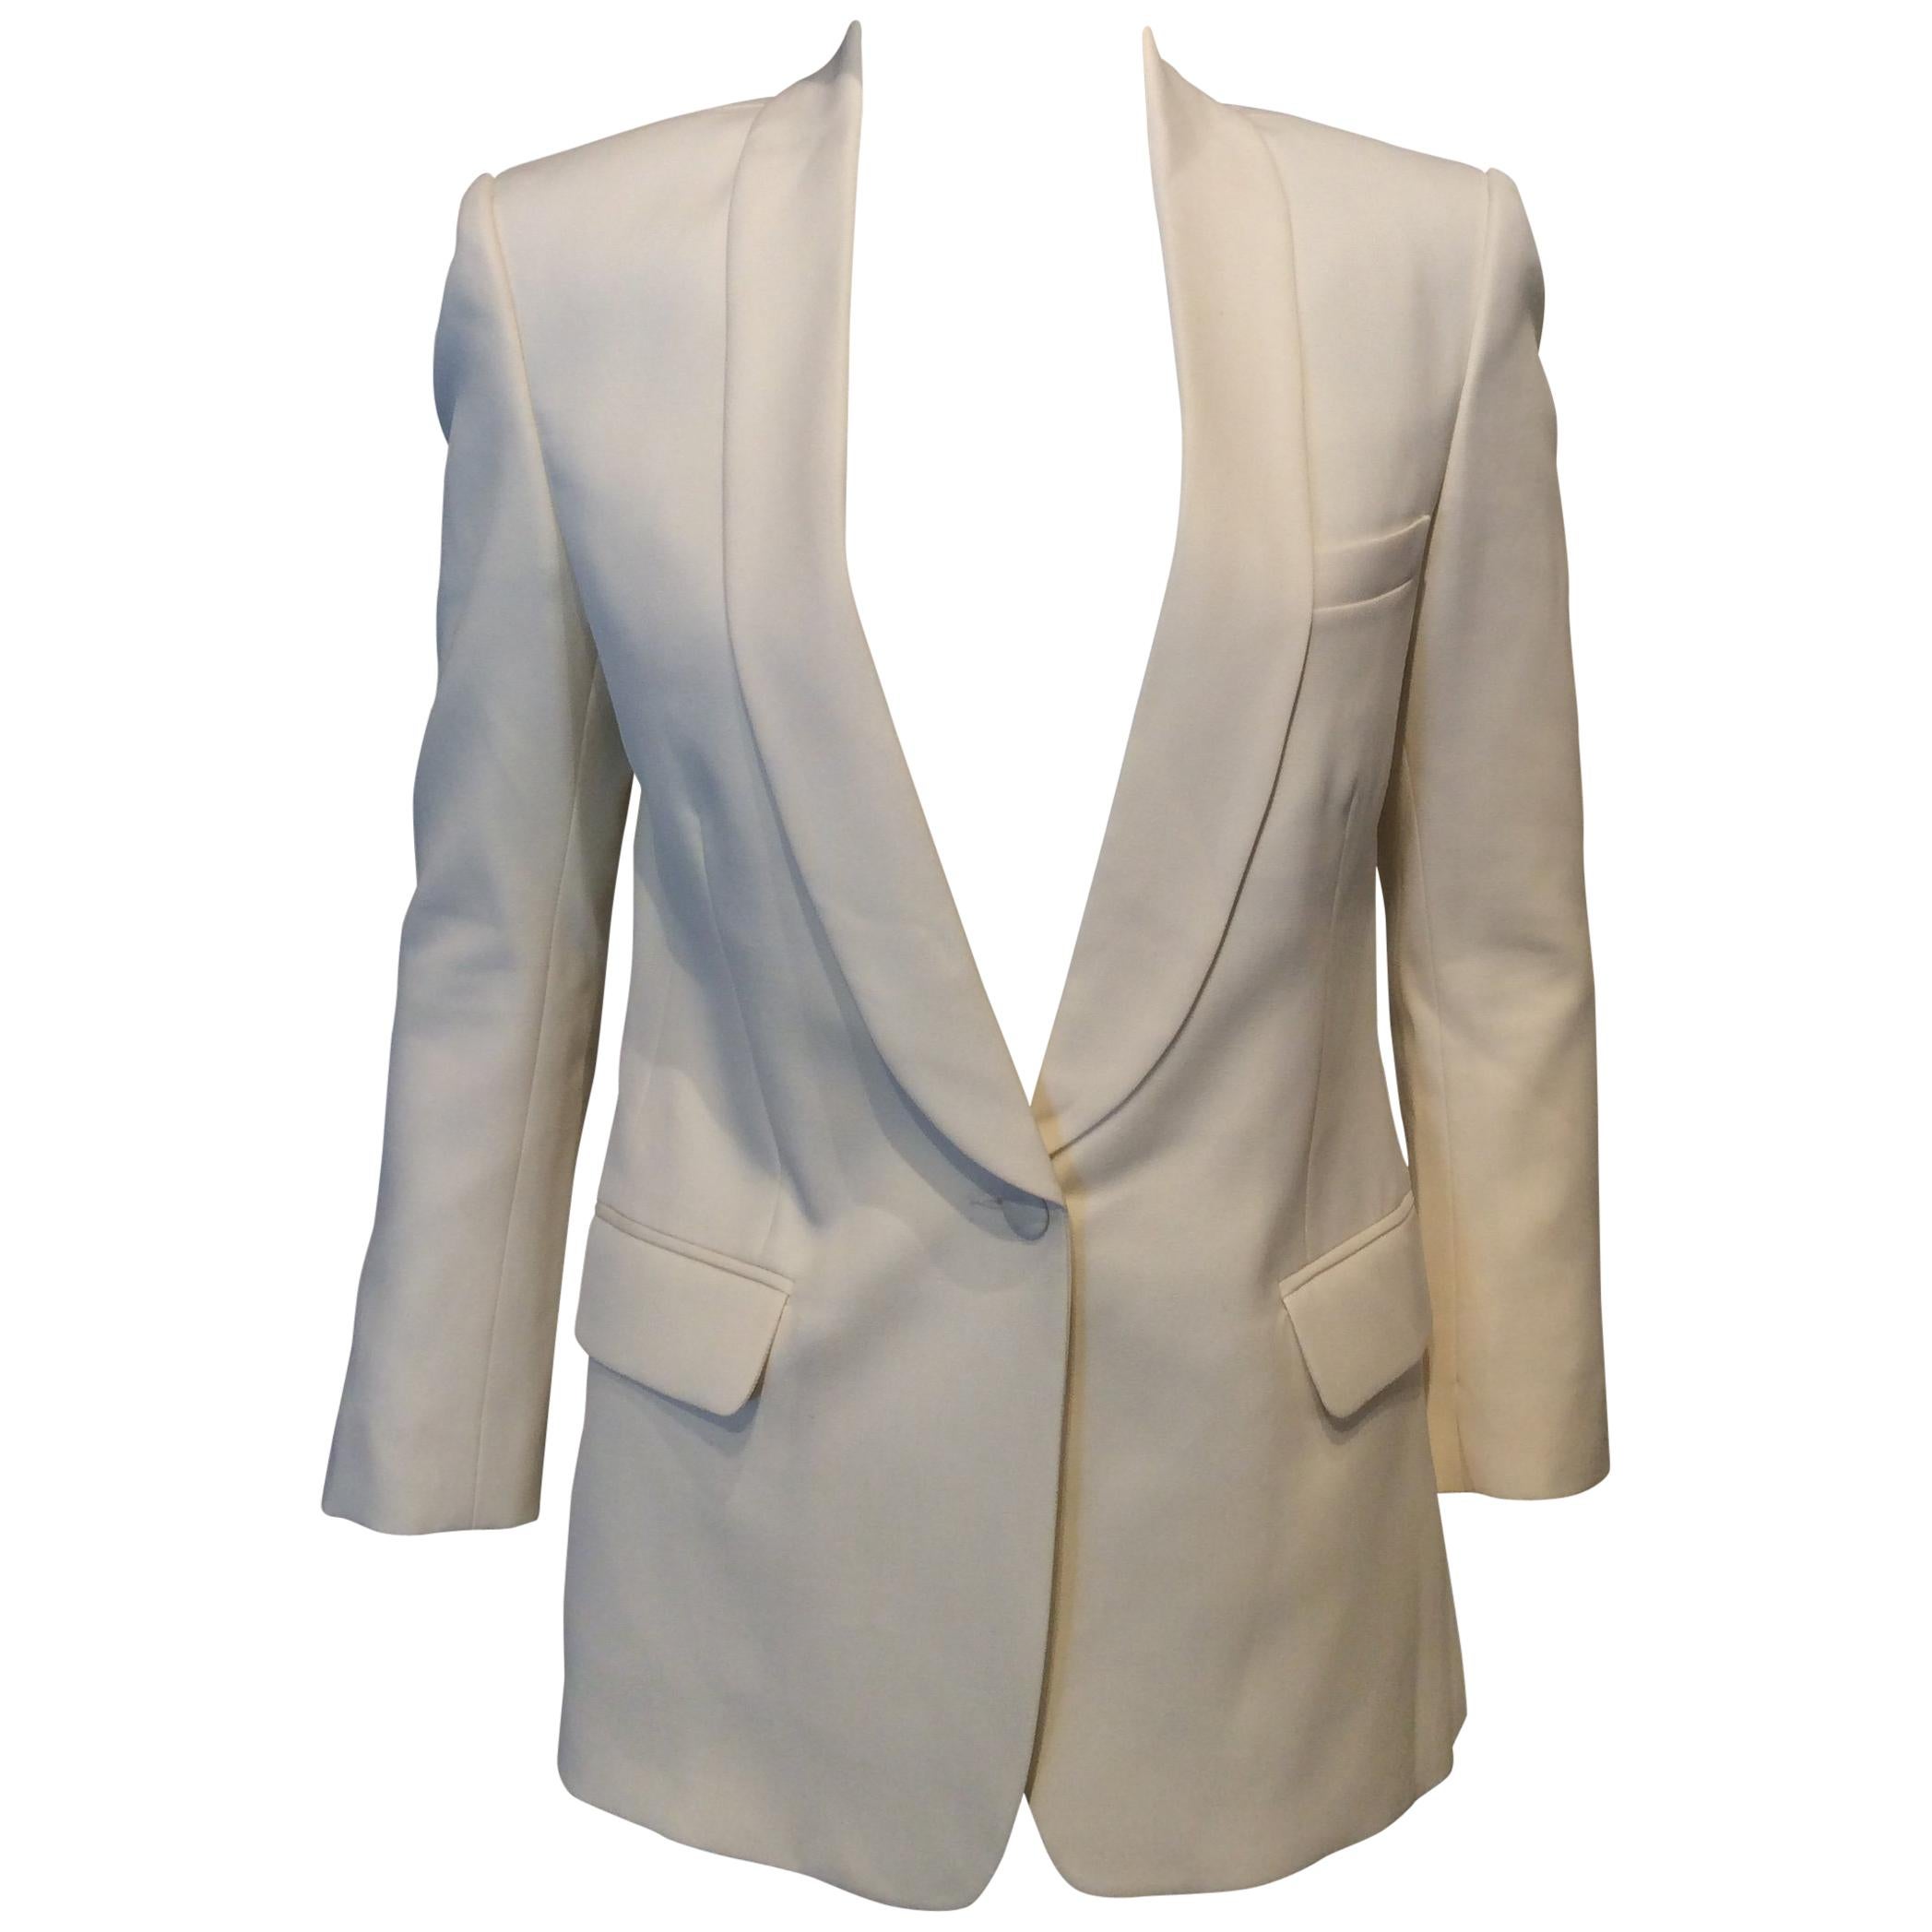 Balmain Ivory Wool Blazer with Tuxedo Lapels and Button Closure Sz Fr34, Us2 For Sale